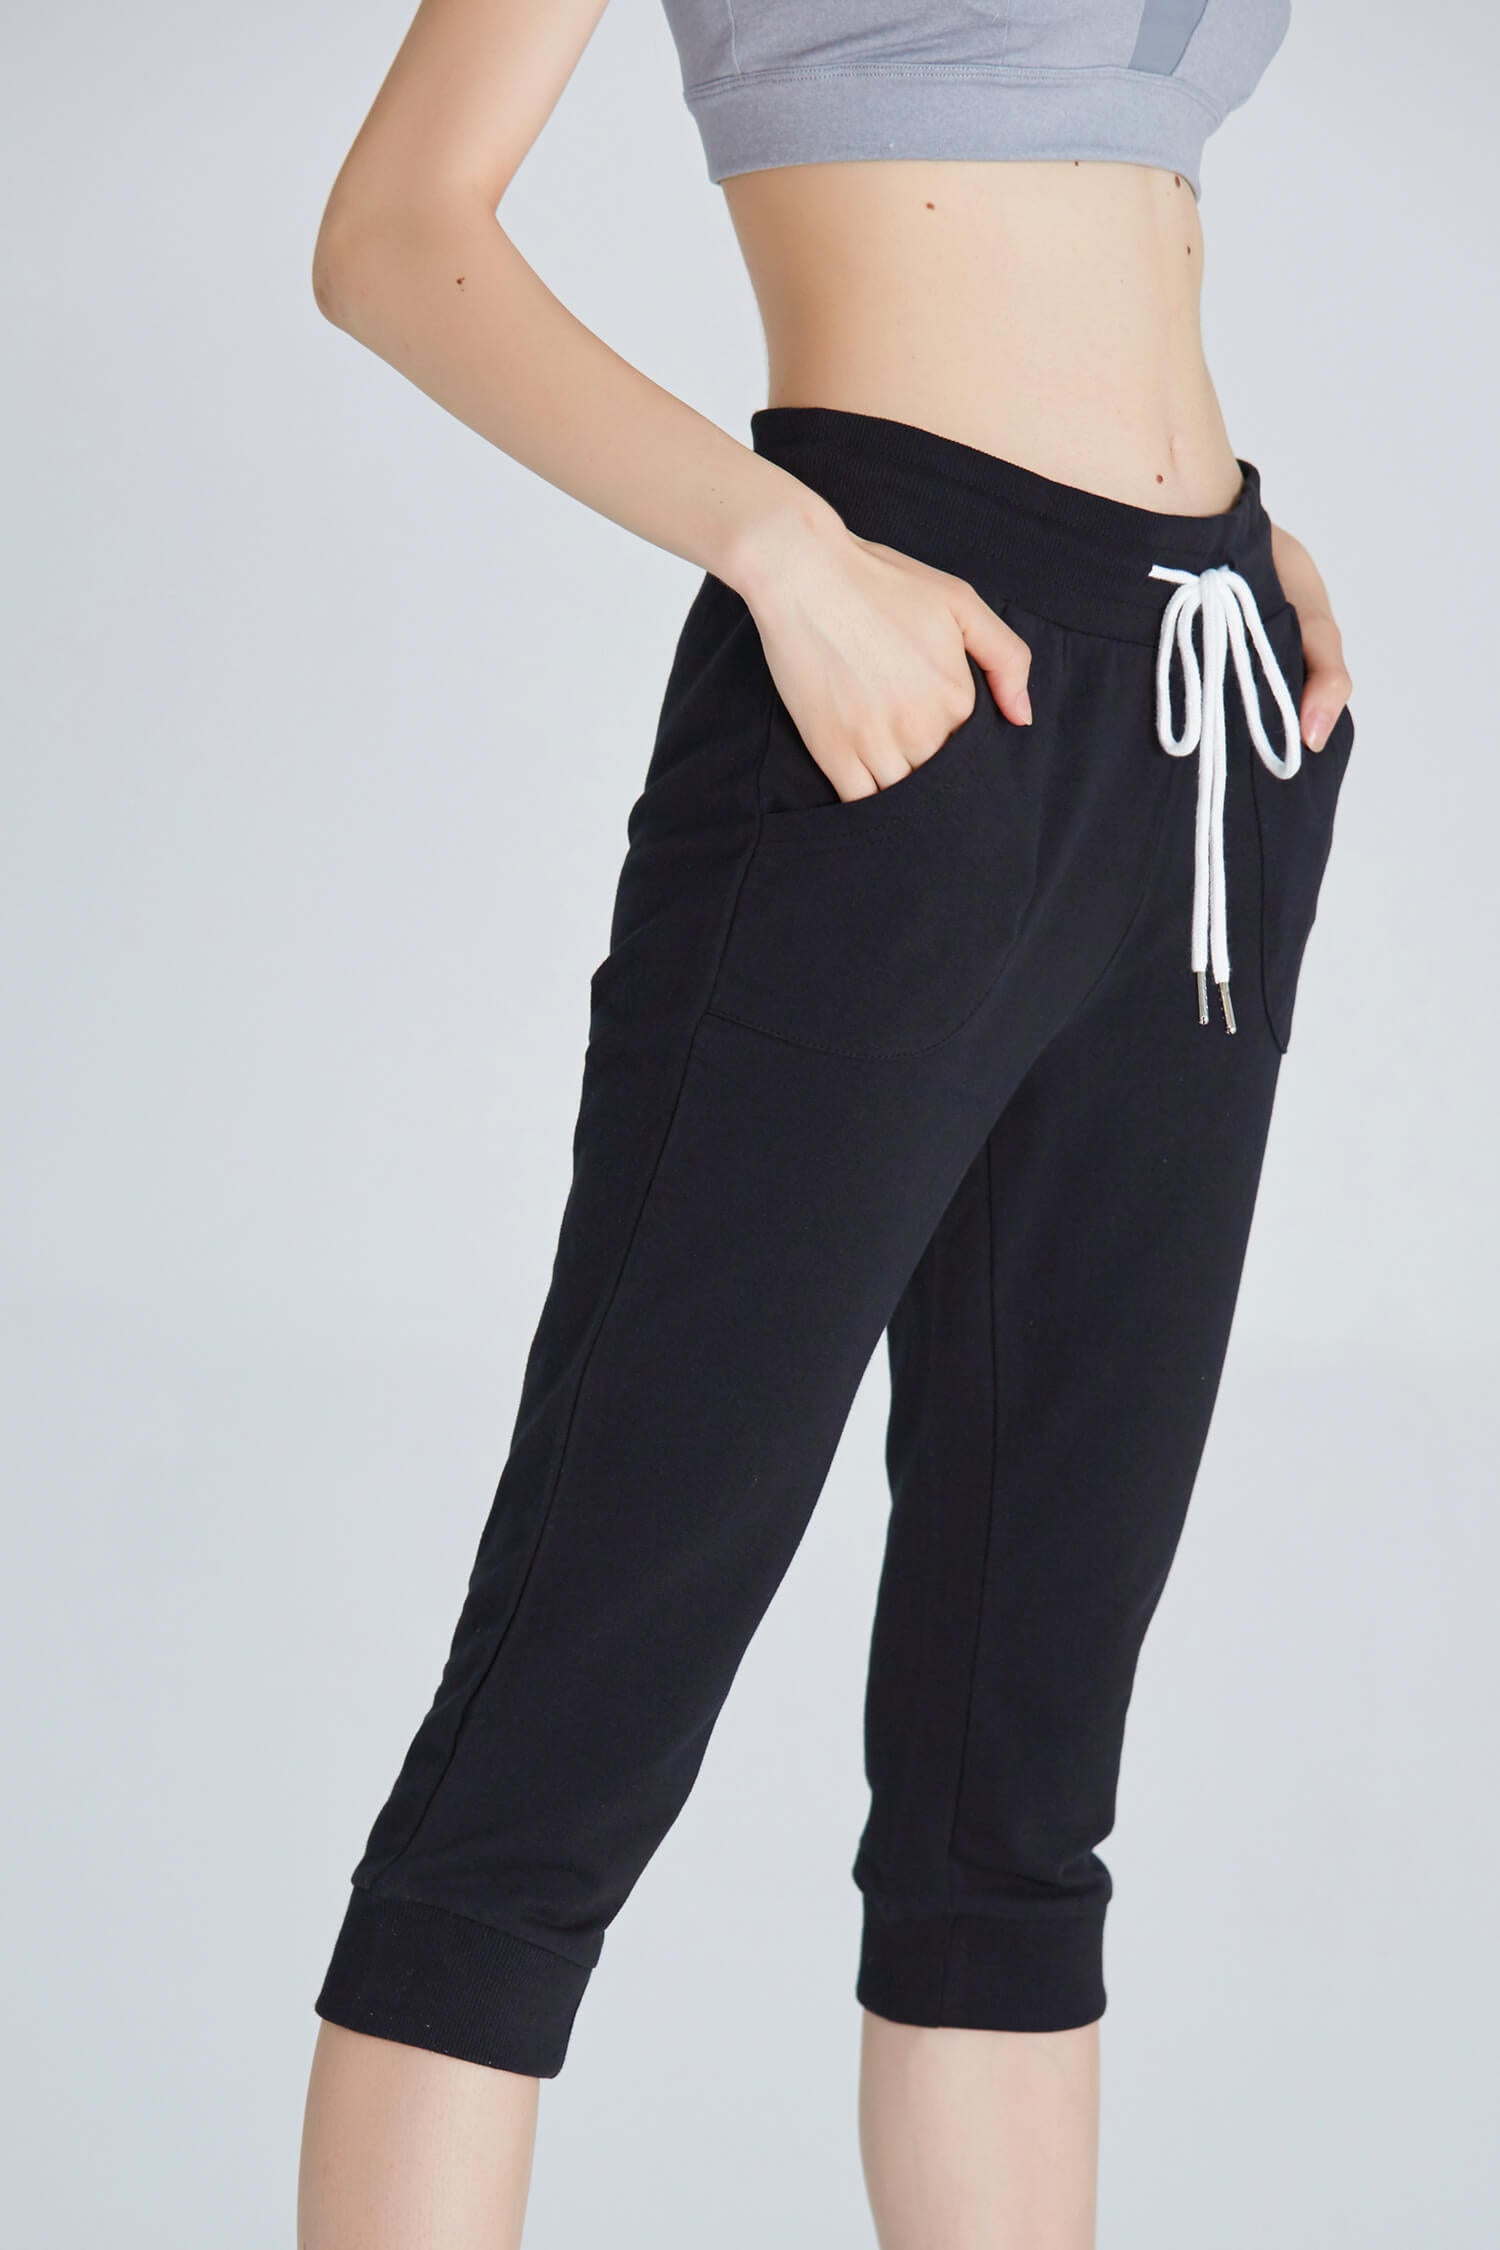 Women Capri Sweat Pants Cotton Gym Joggers Soft Running with Large Pockets  by PULI